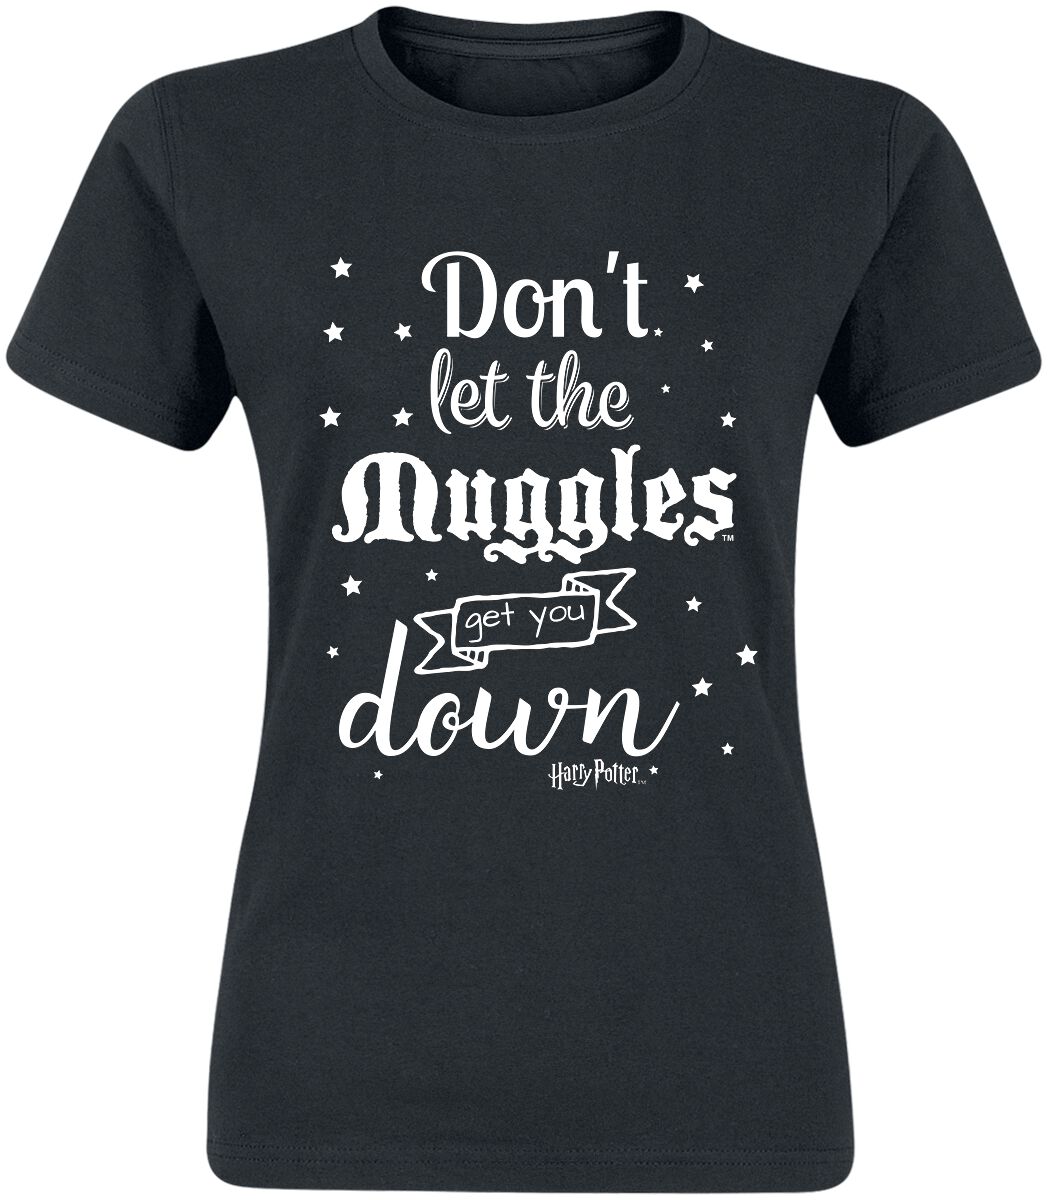 Harry Potter Don't Let The Muggles Get You Down T-Shirt black